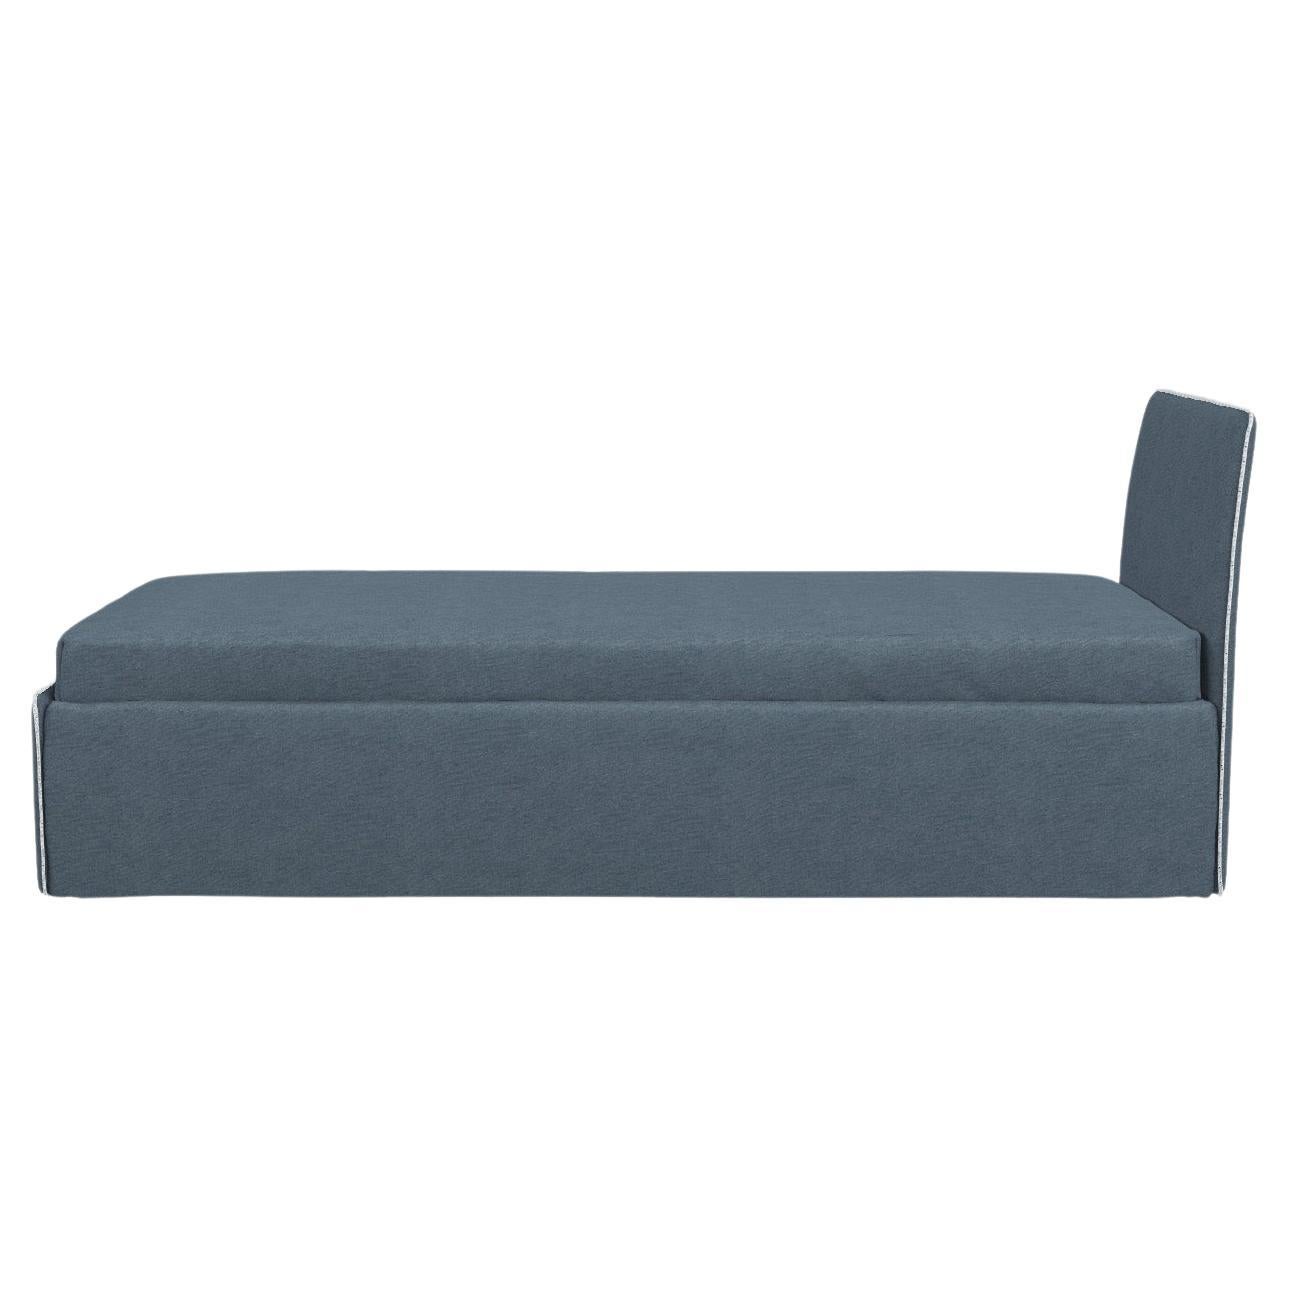 Gervasoni Open 1 Small Modular Bed Sofa in Munch Upholstery by Paola Navone